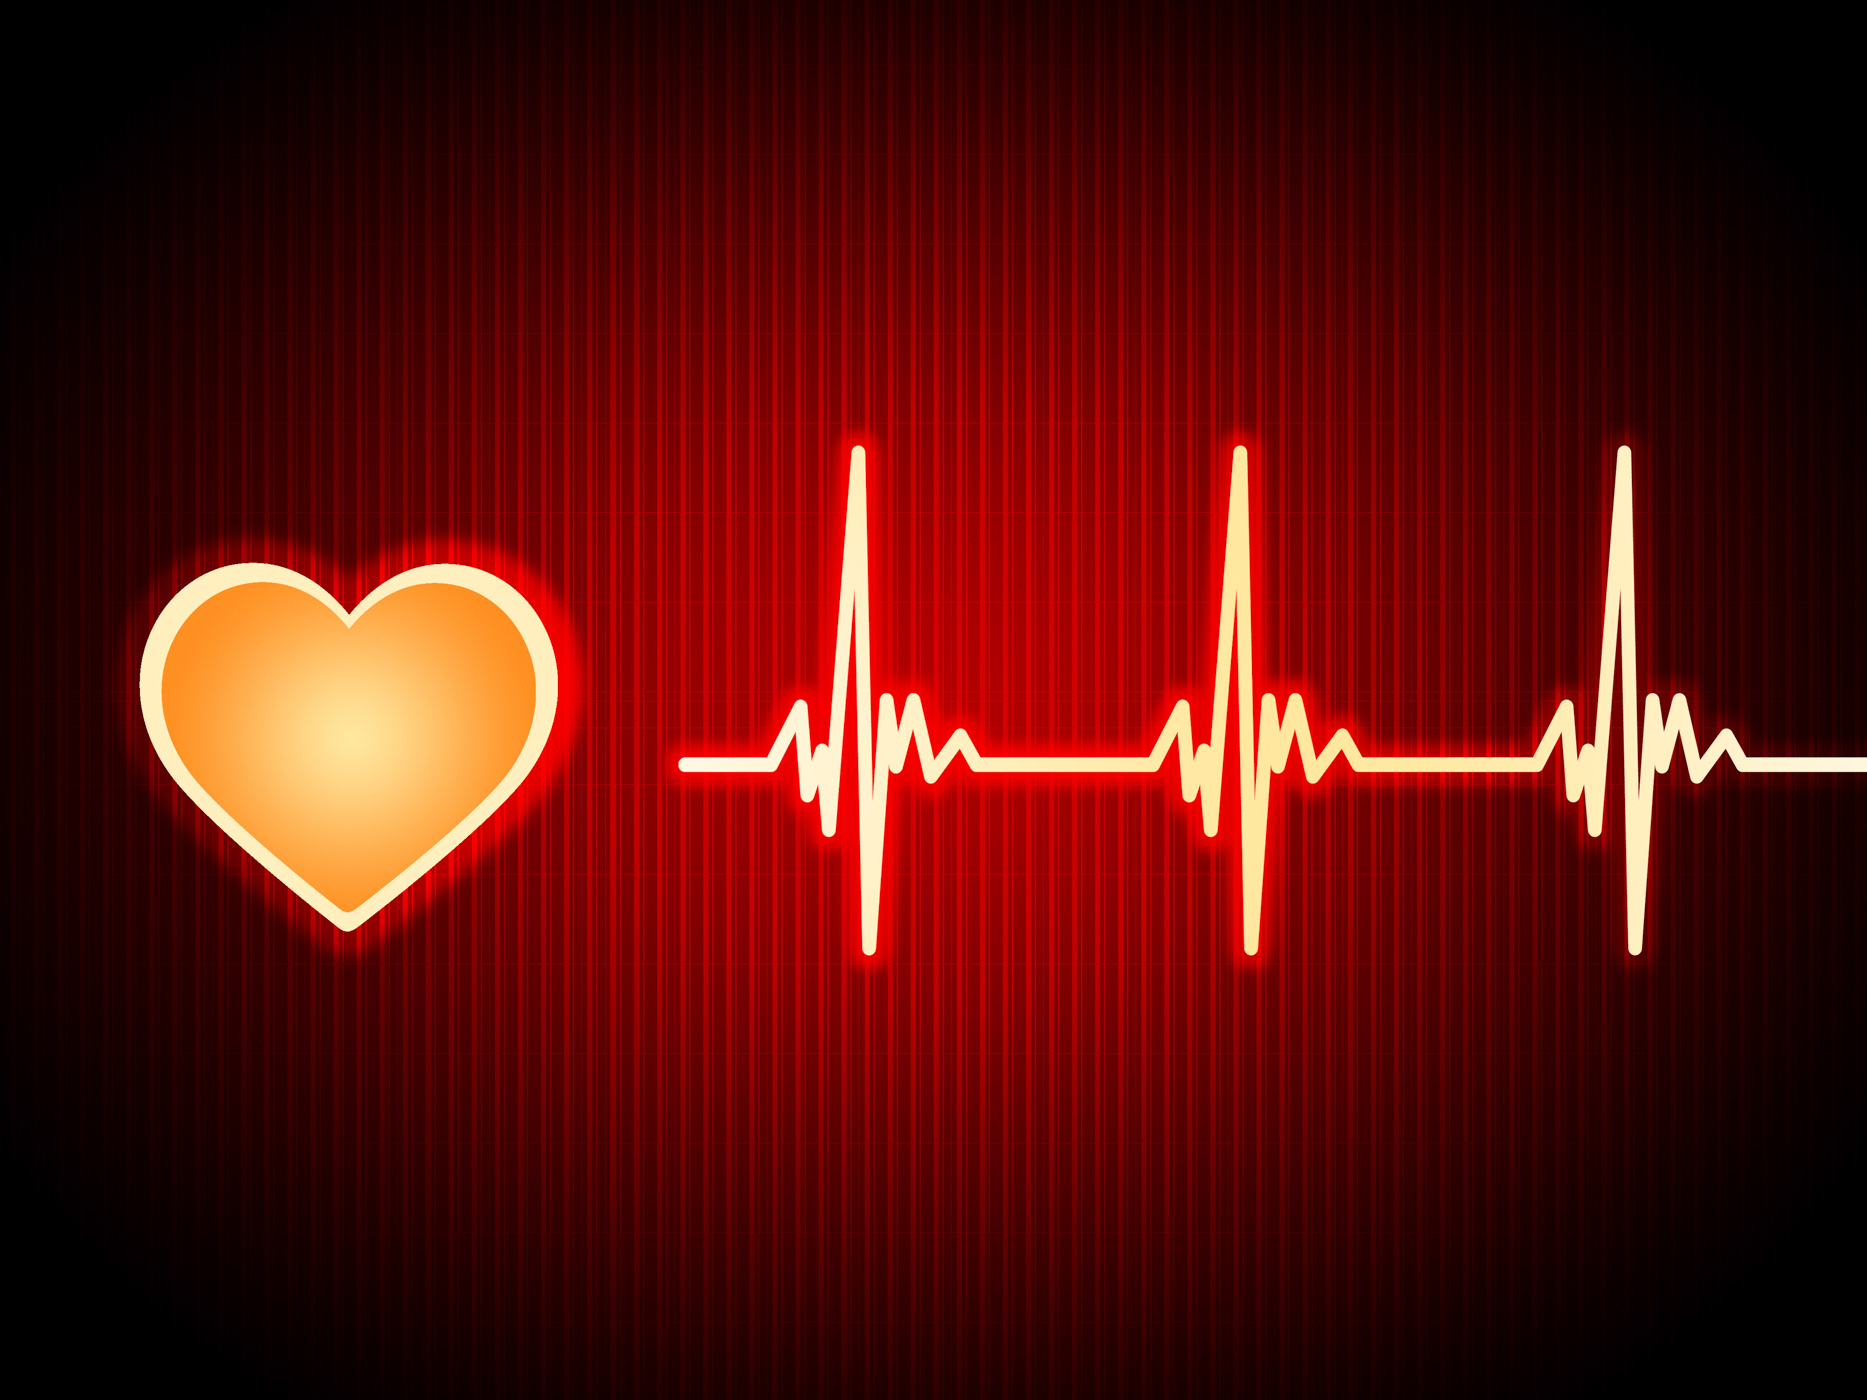 Red Heart Background Shows Pumping Blood And Alive, Alive, Heartrate, Red, Record, HQ Photo